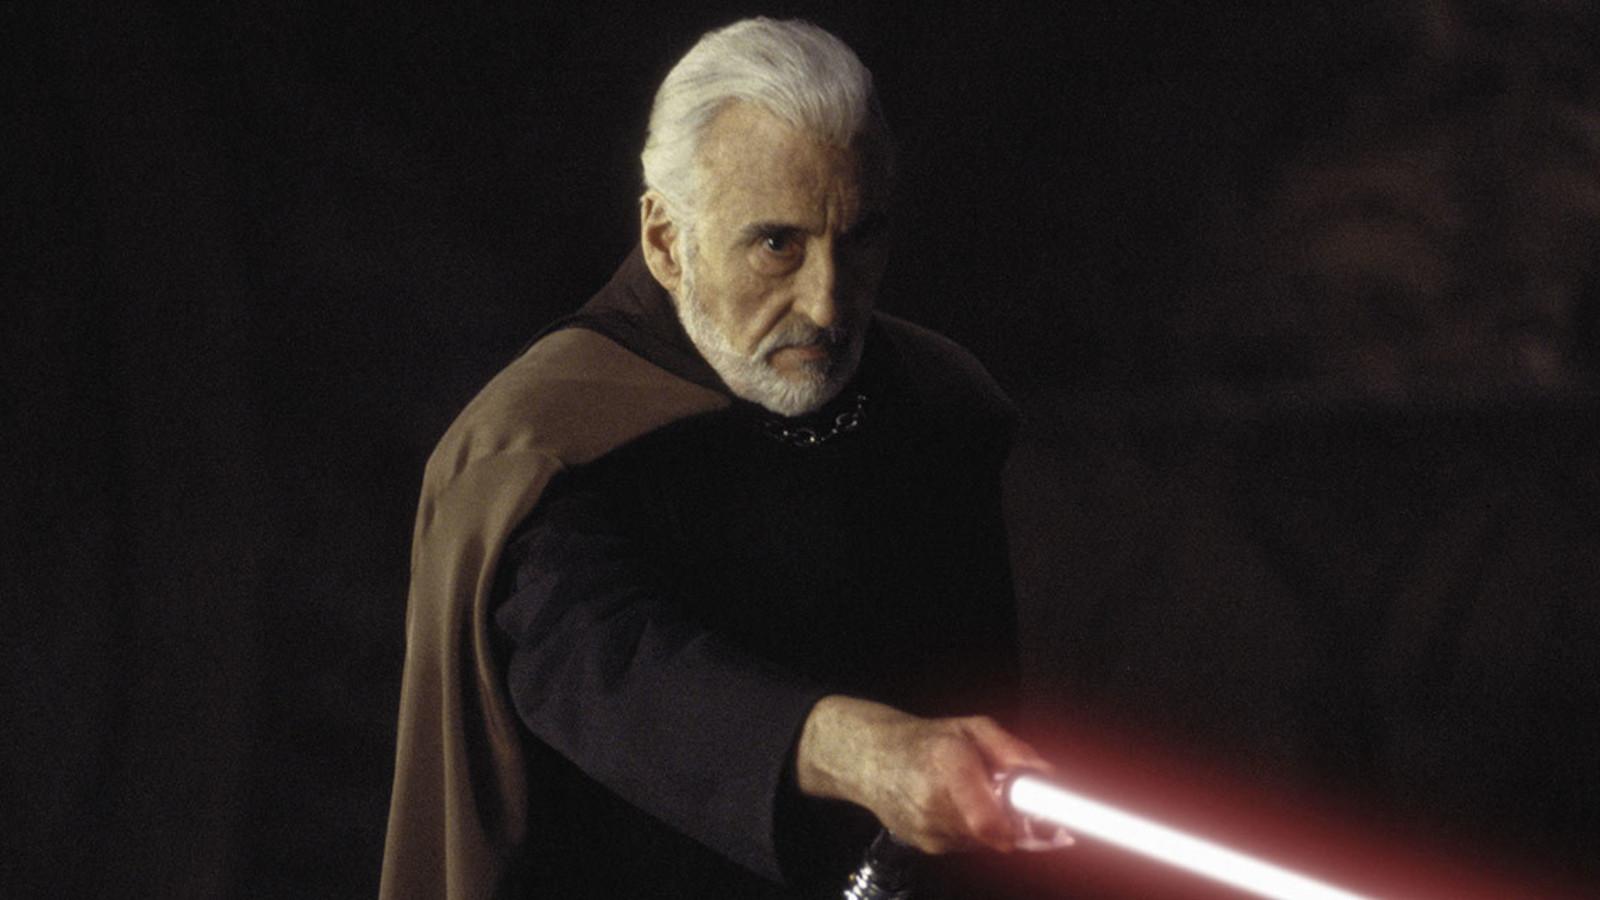 Count Dooku in Revenge of the Sith.